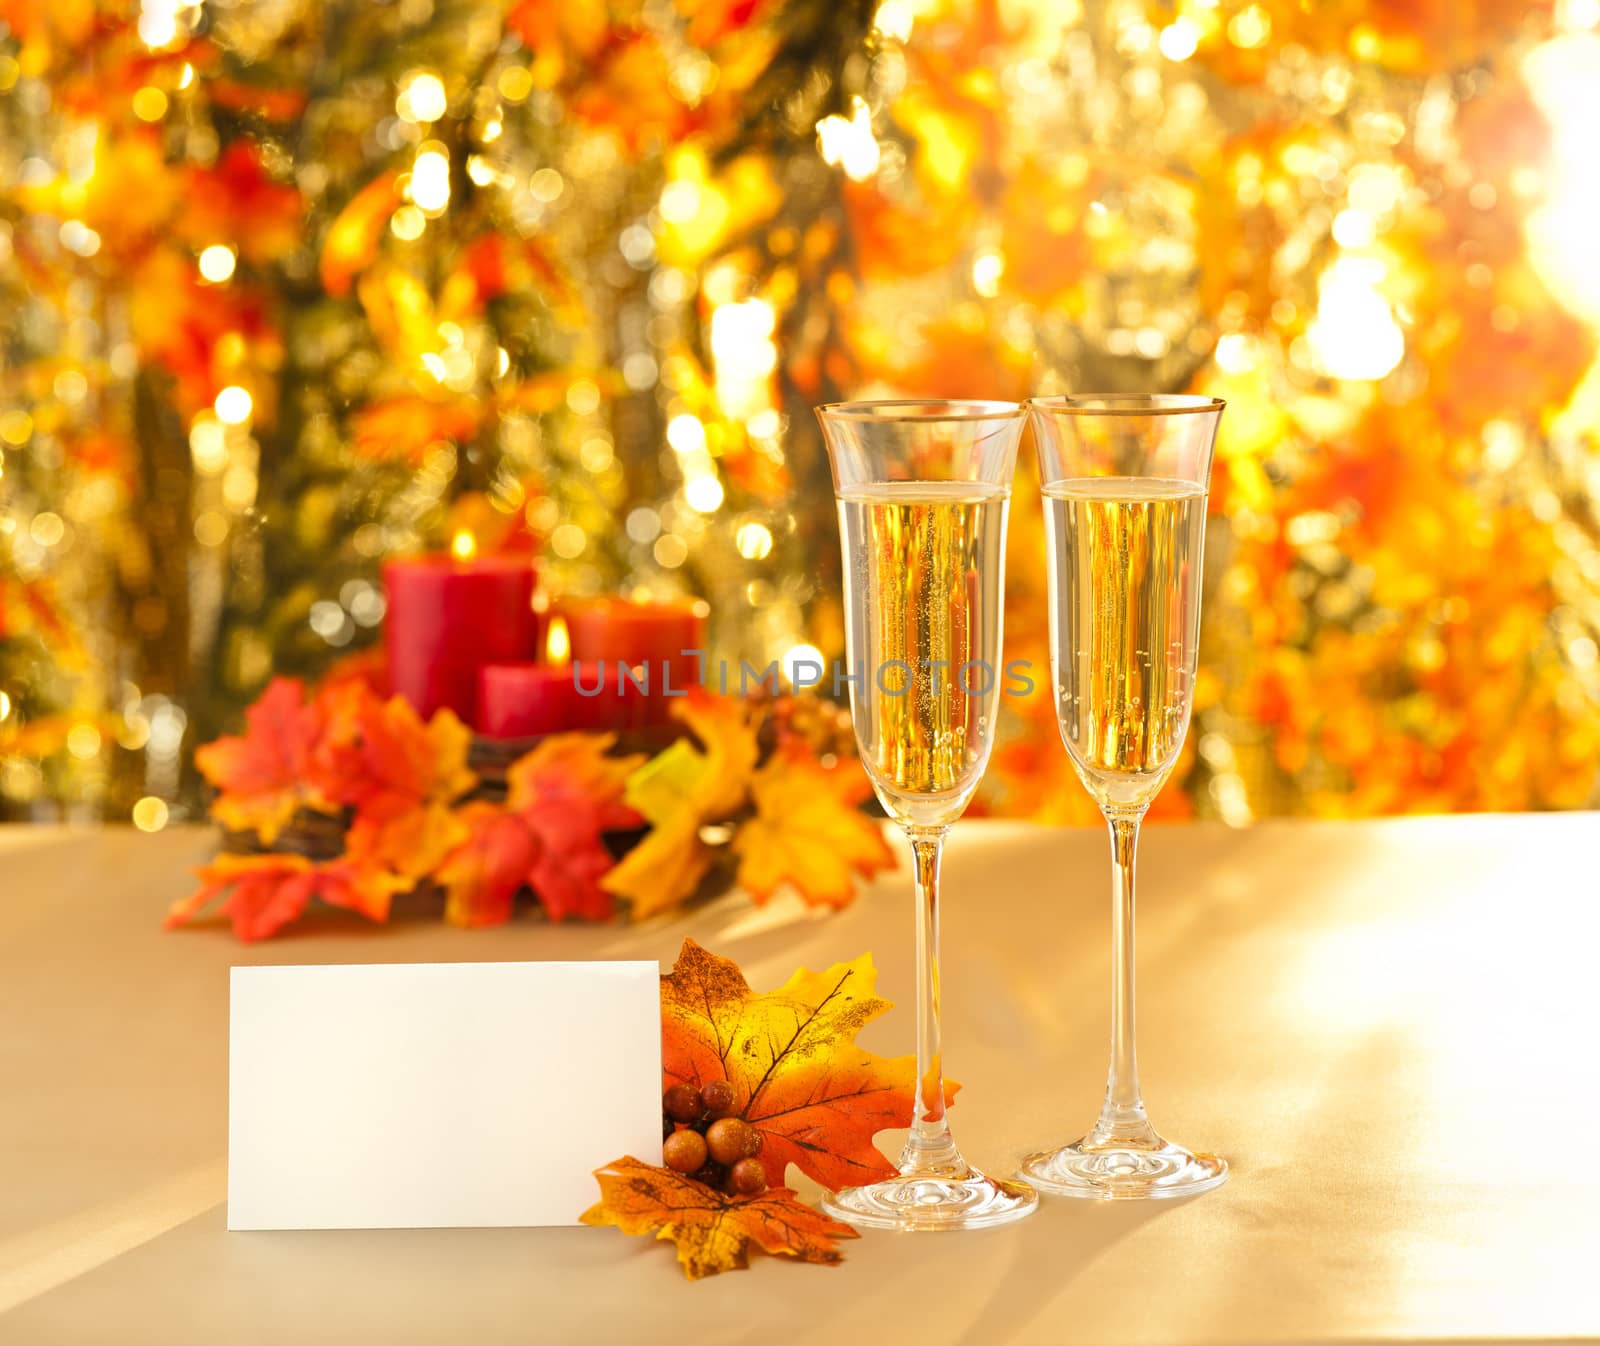 Champagne glasses for reception in front of autumn background and candles and placecard